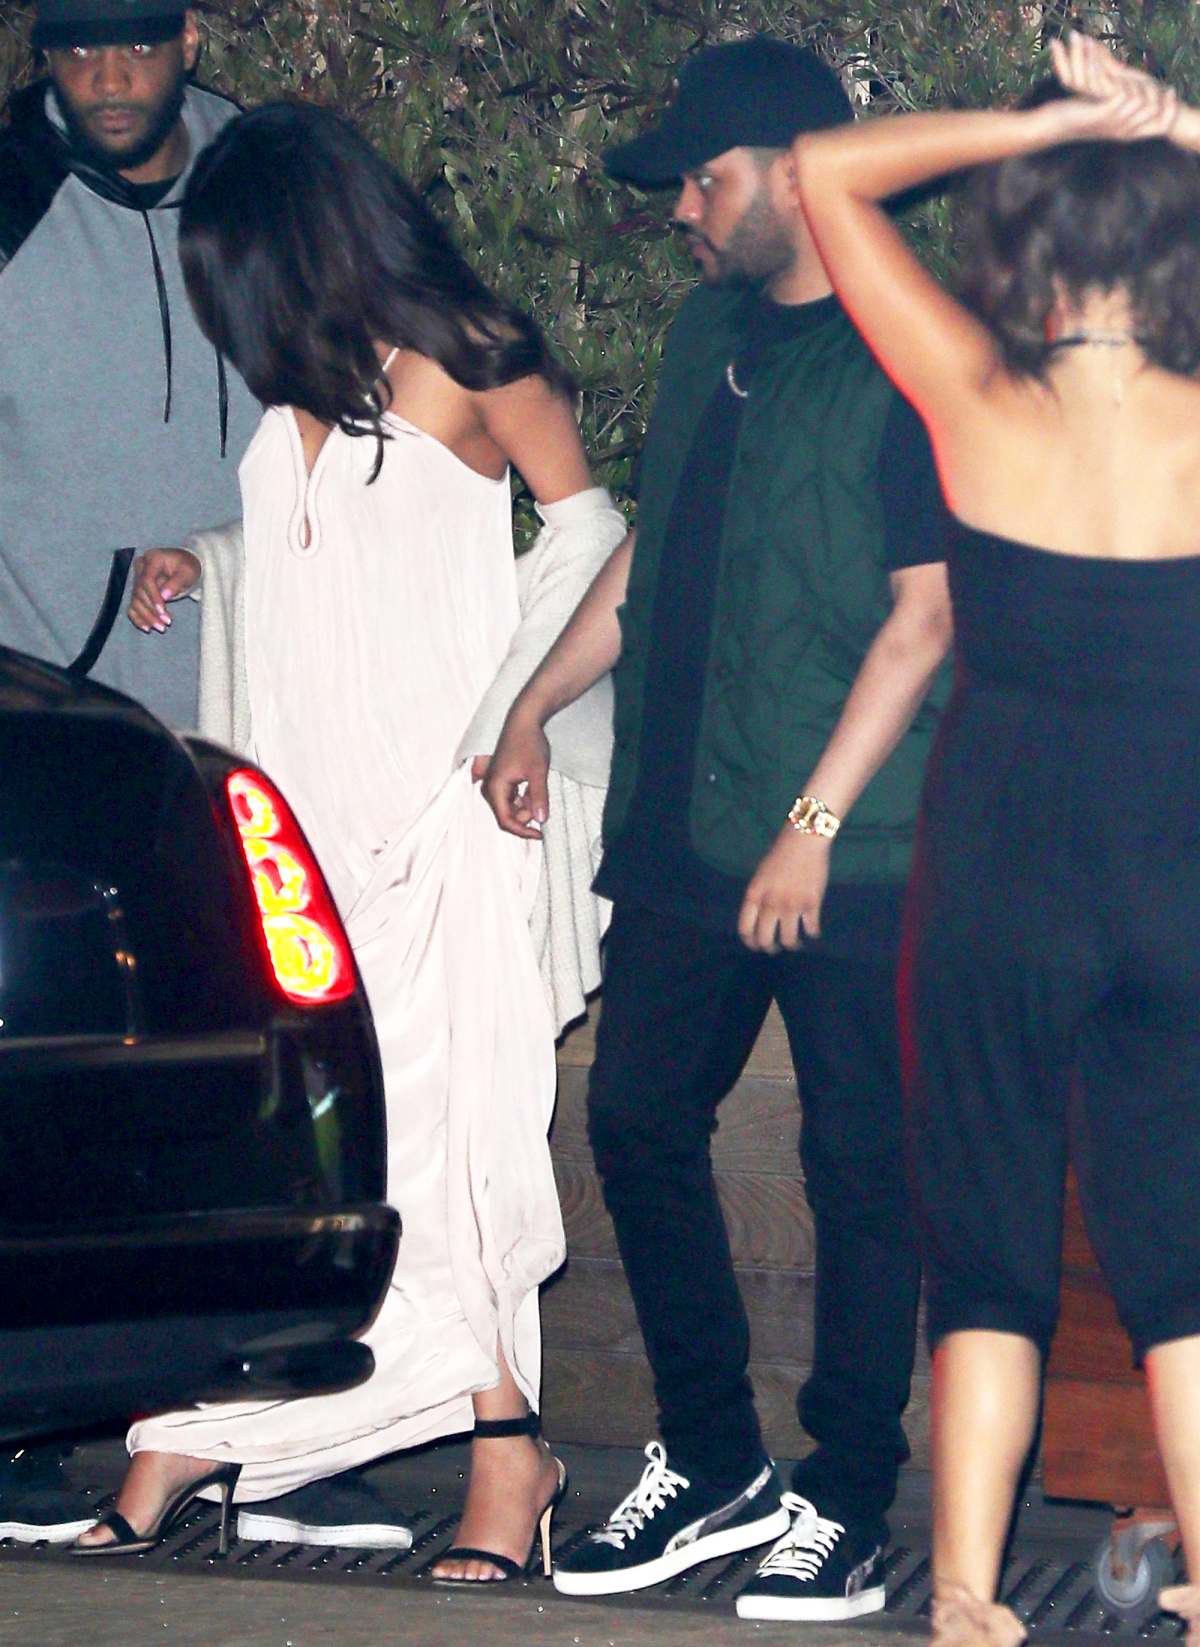 Selena Gomez and The Weeknd Dress in Matching Tracksuits at Disneyland